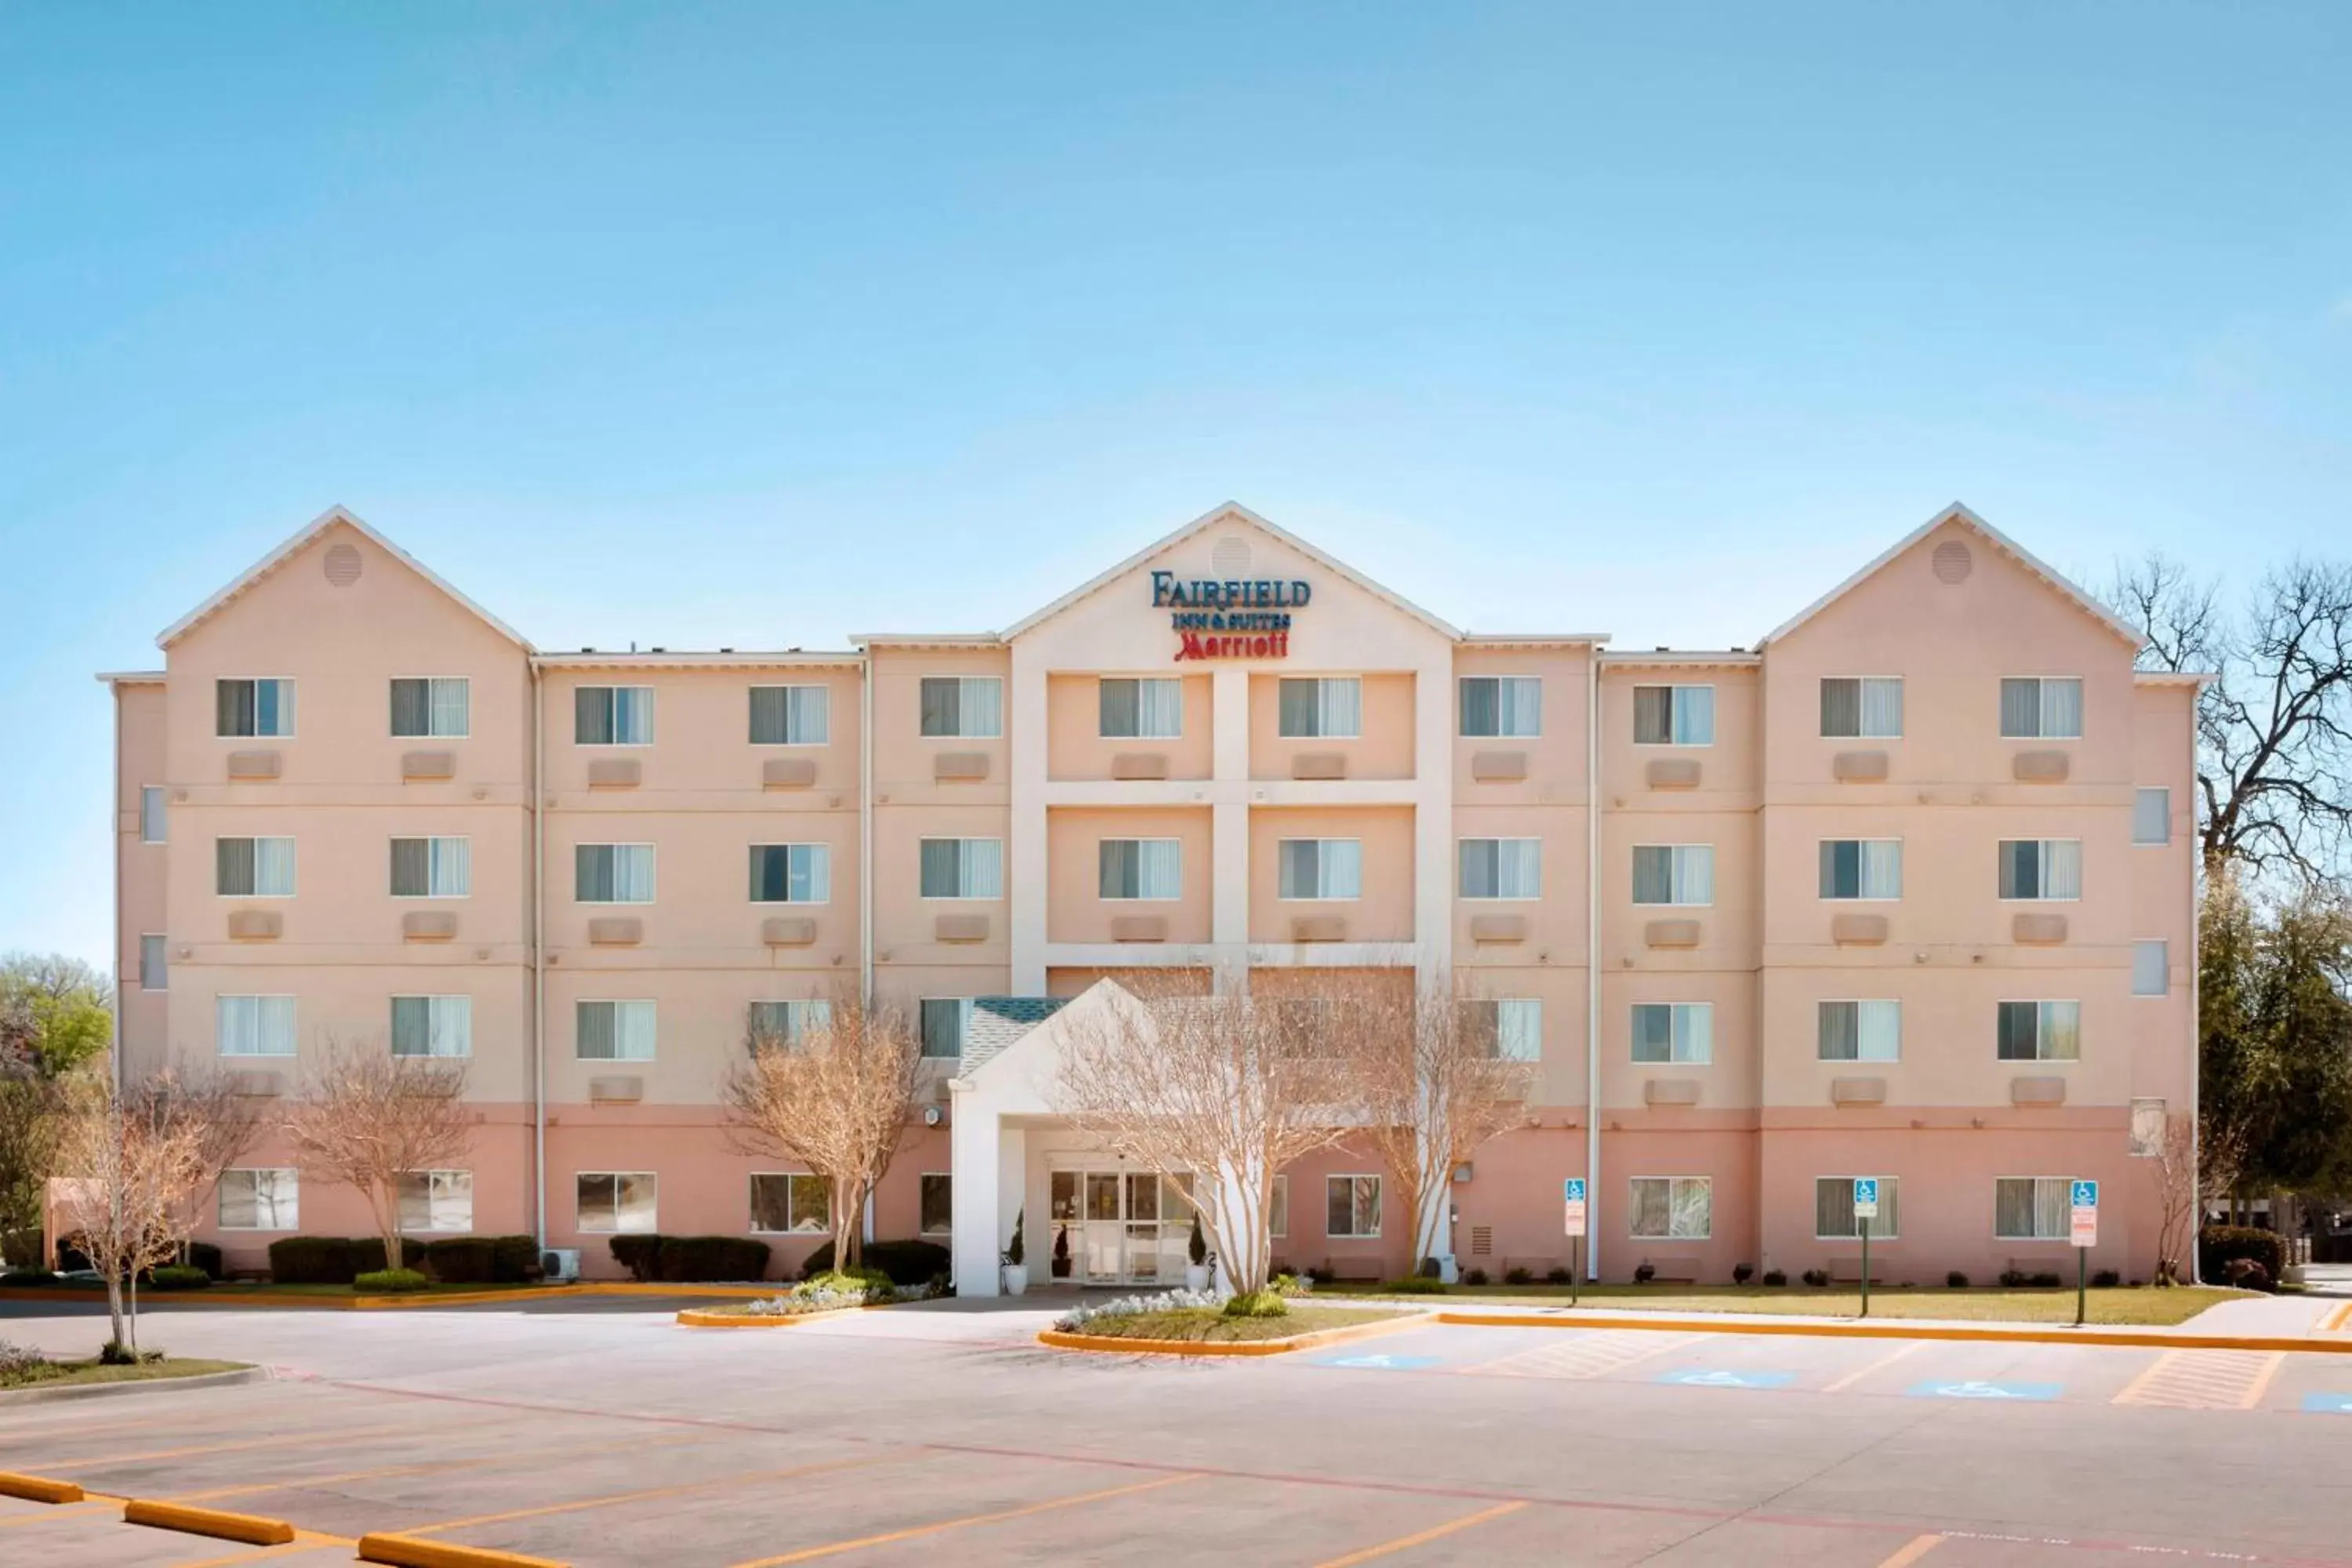 Property Building in Fairfield Inn & Suites Fort Worth University Drive